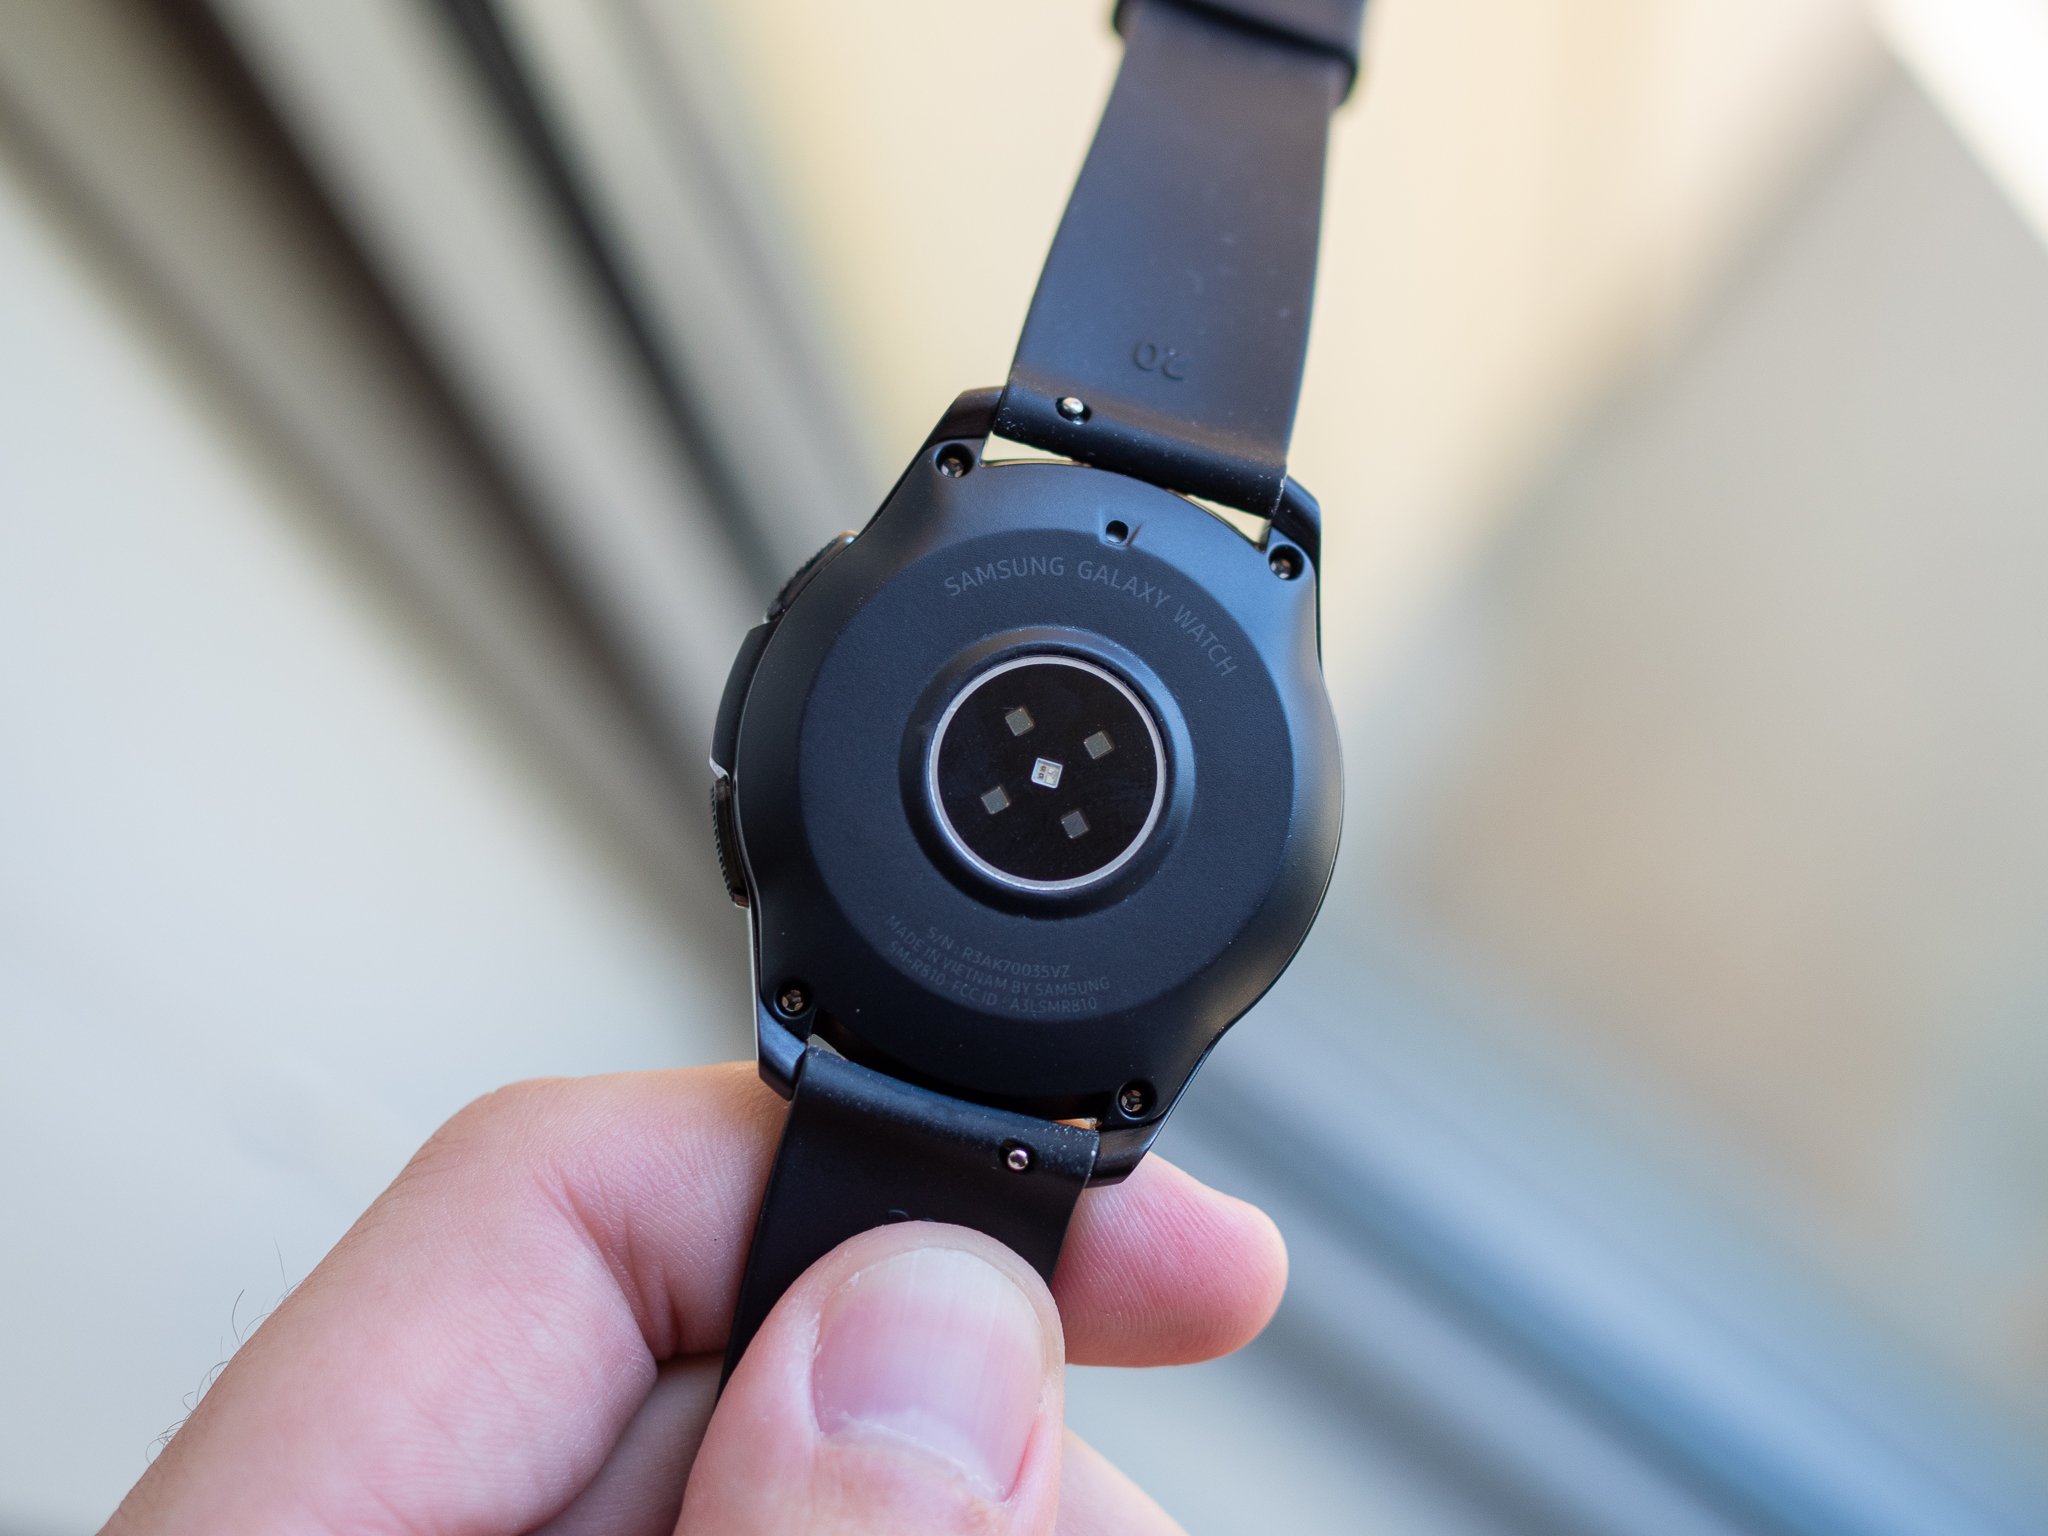 Samsung Galaxy Watch [Review]: A do-everything Android smartwatch